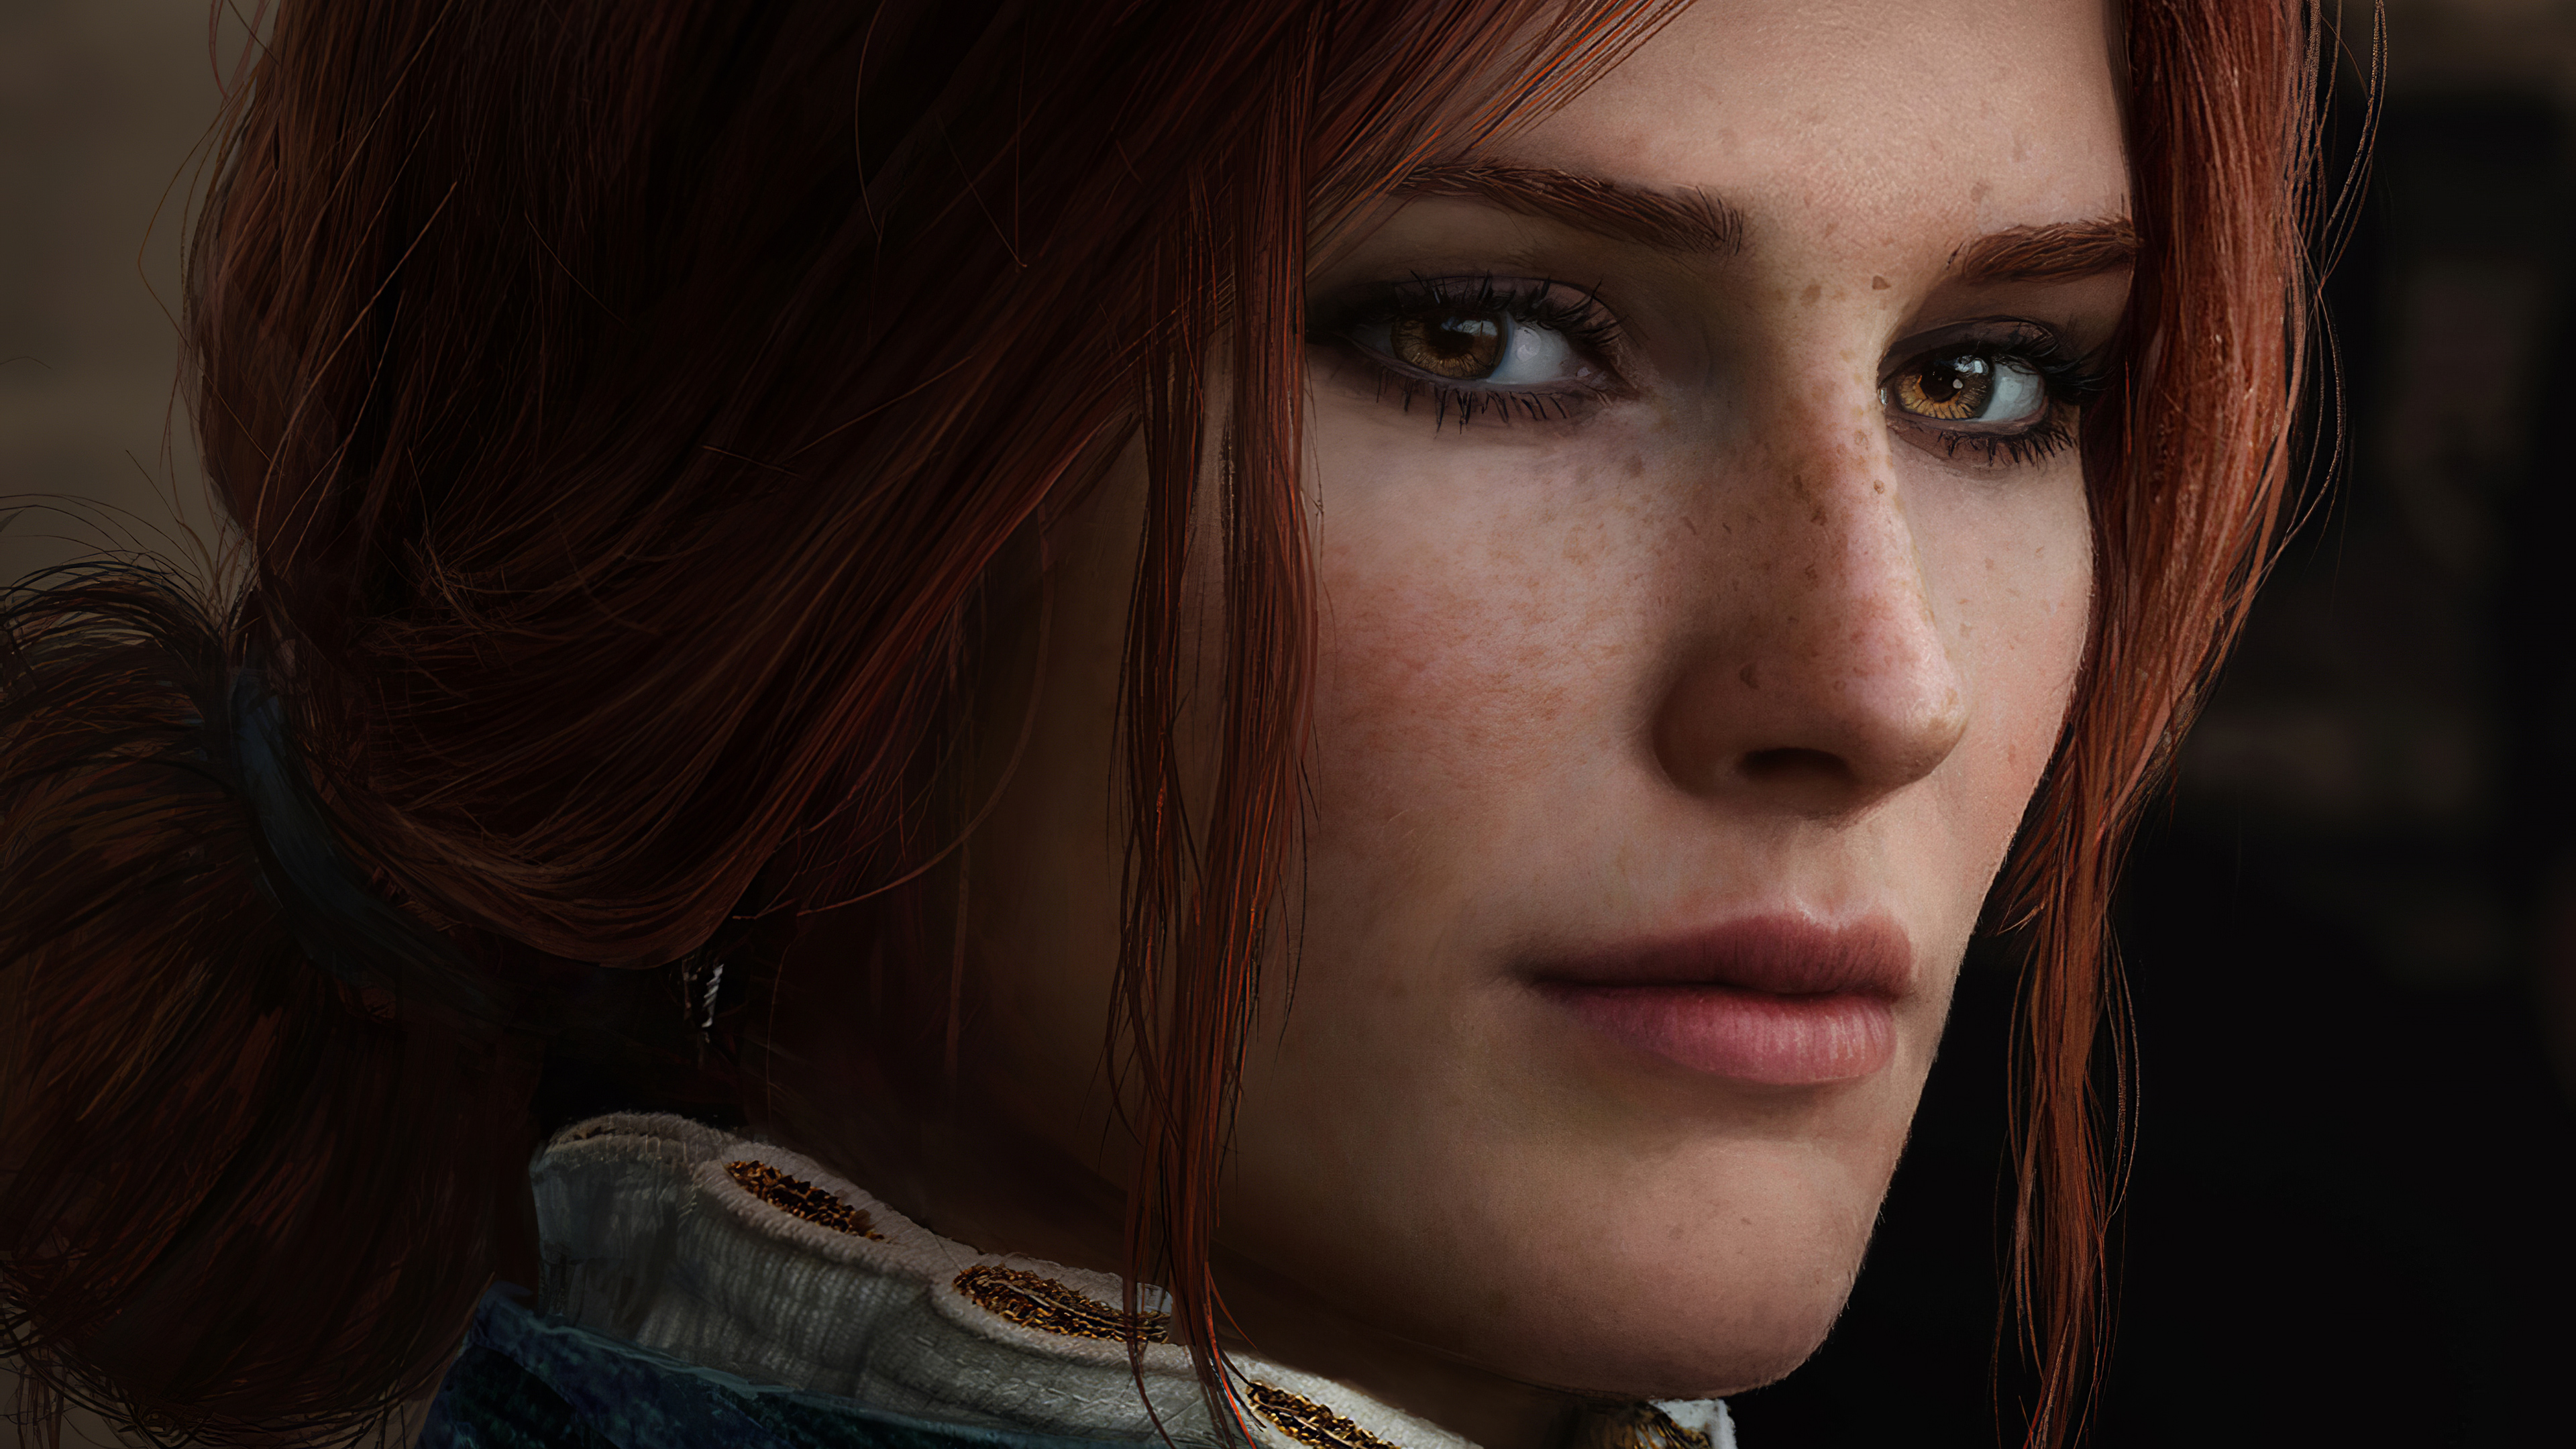 The Witcher The Witcher 3 Wild Hunt Triss Merigold video game characters  1080P wallpaper hdwallpaper desktop  Triss merigold The witcher The  witcher 3